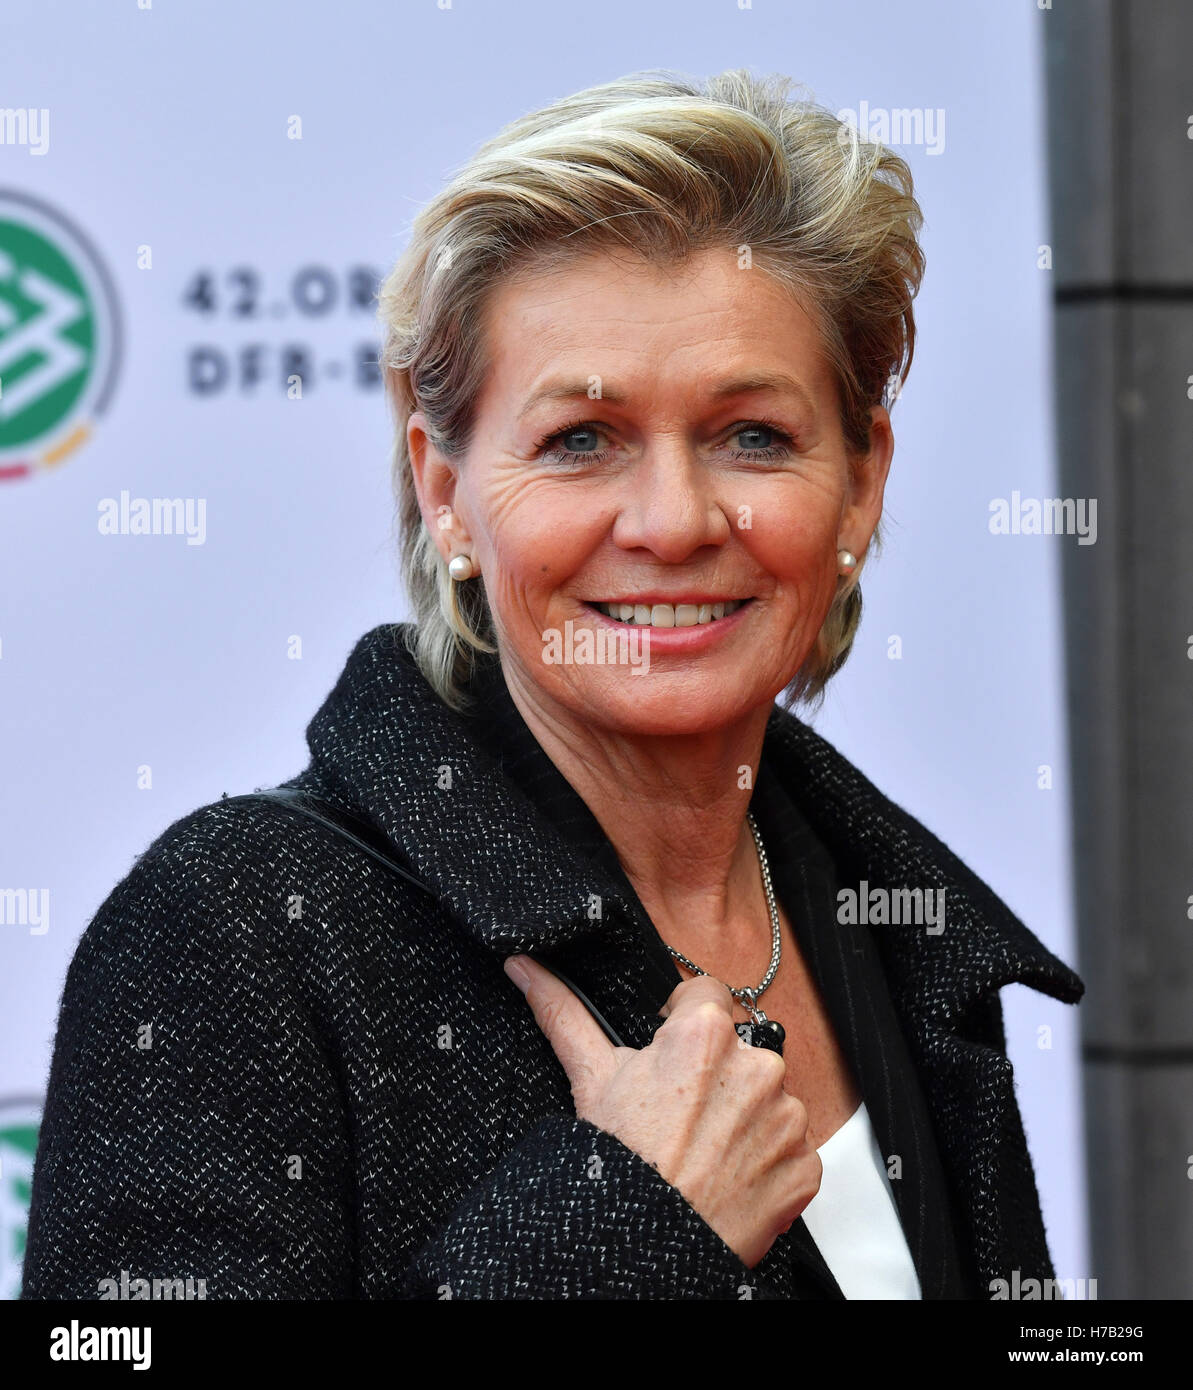 Erfurt, Germany. 03rd Nov, 2016. Former coach of the German national women's soccer team, Silvia Neid, arrives to the traditional ceremony that marks the start of the 42nd Ordinary DFB Bundestag in Erfurt, Germany, 03 November 2016. The 260 delegates from regional and state associations and the representatives of the league association will vote for the DFB (German Football Association) president on 04 November 2016. Photo: MARTIN SCHUTT/dpa/Alamy Live News Stock Photo